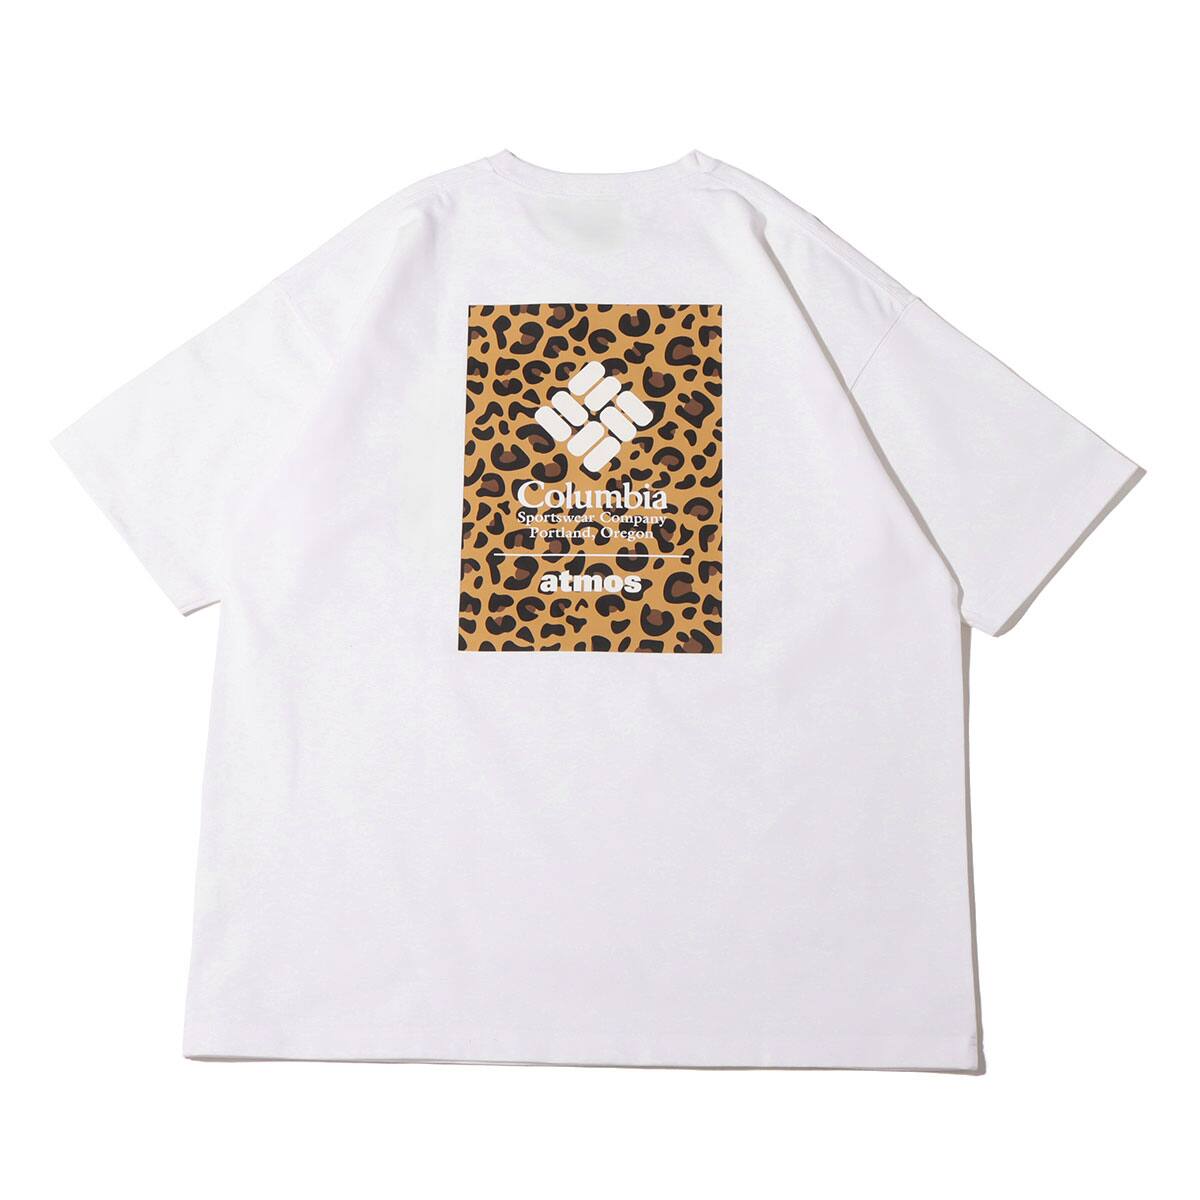 Columbia x atmos white Tee ヒョウ柄 | www.myglobaltax.com